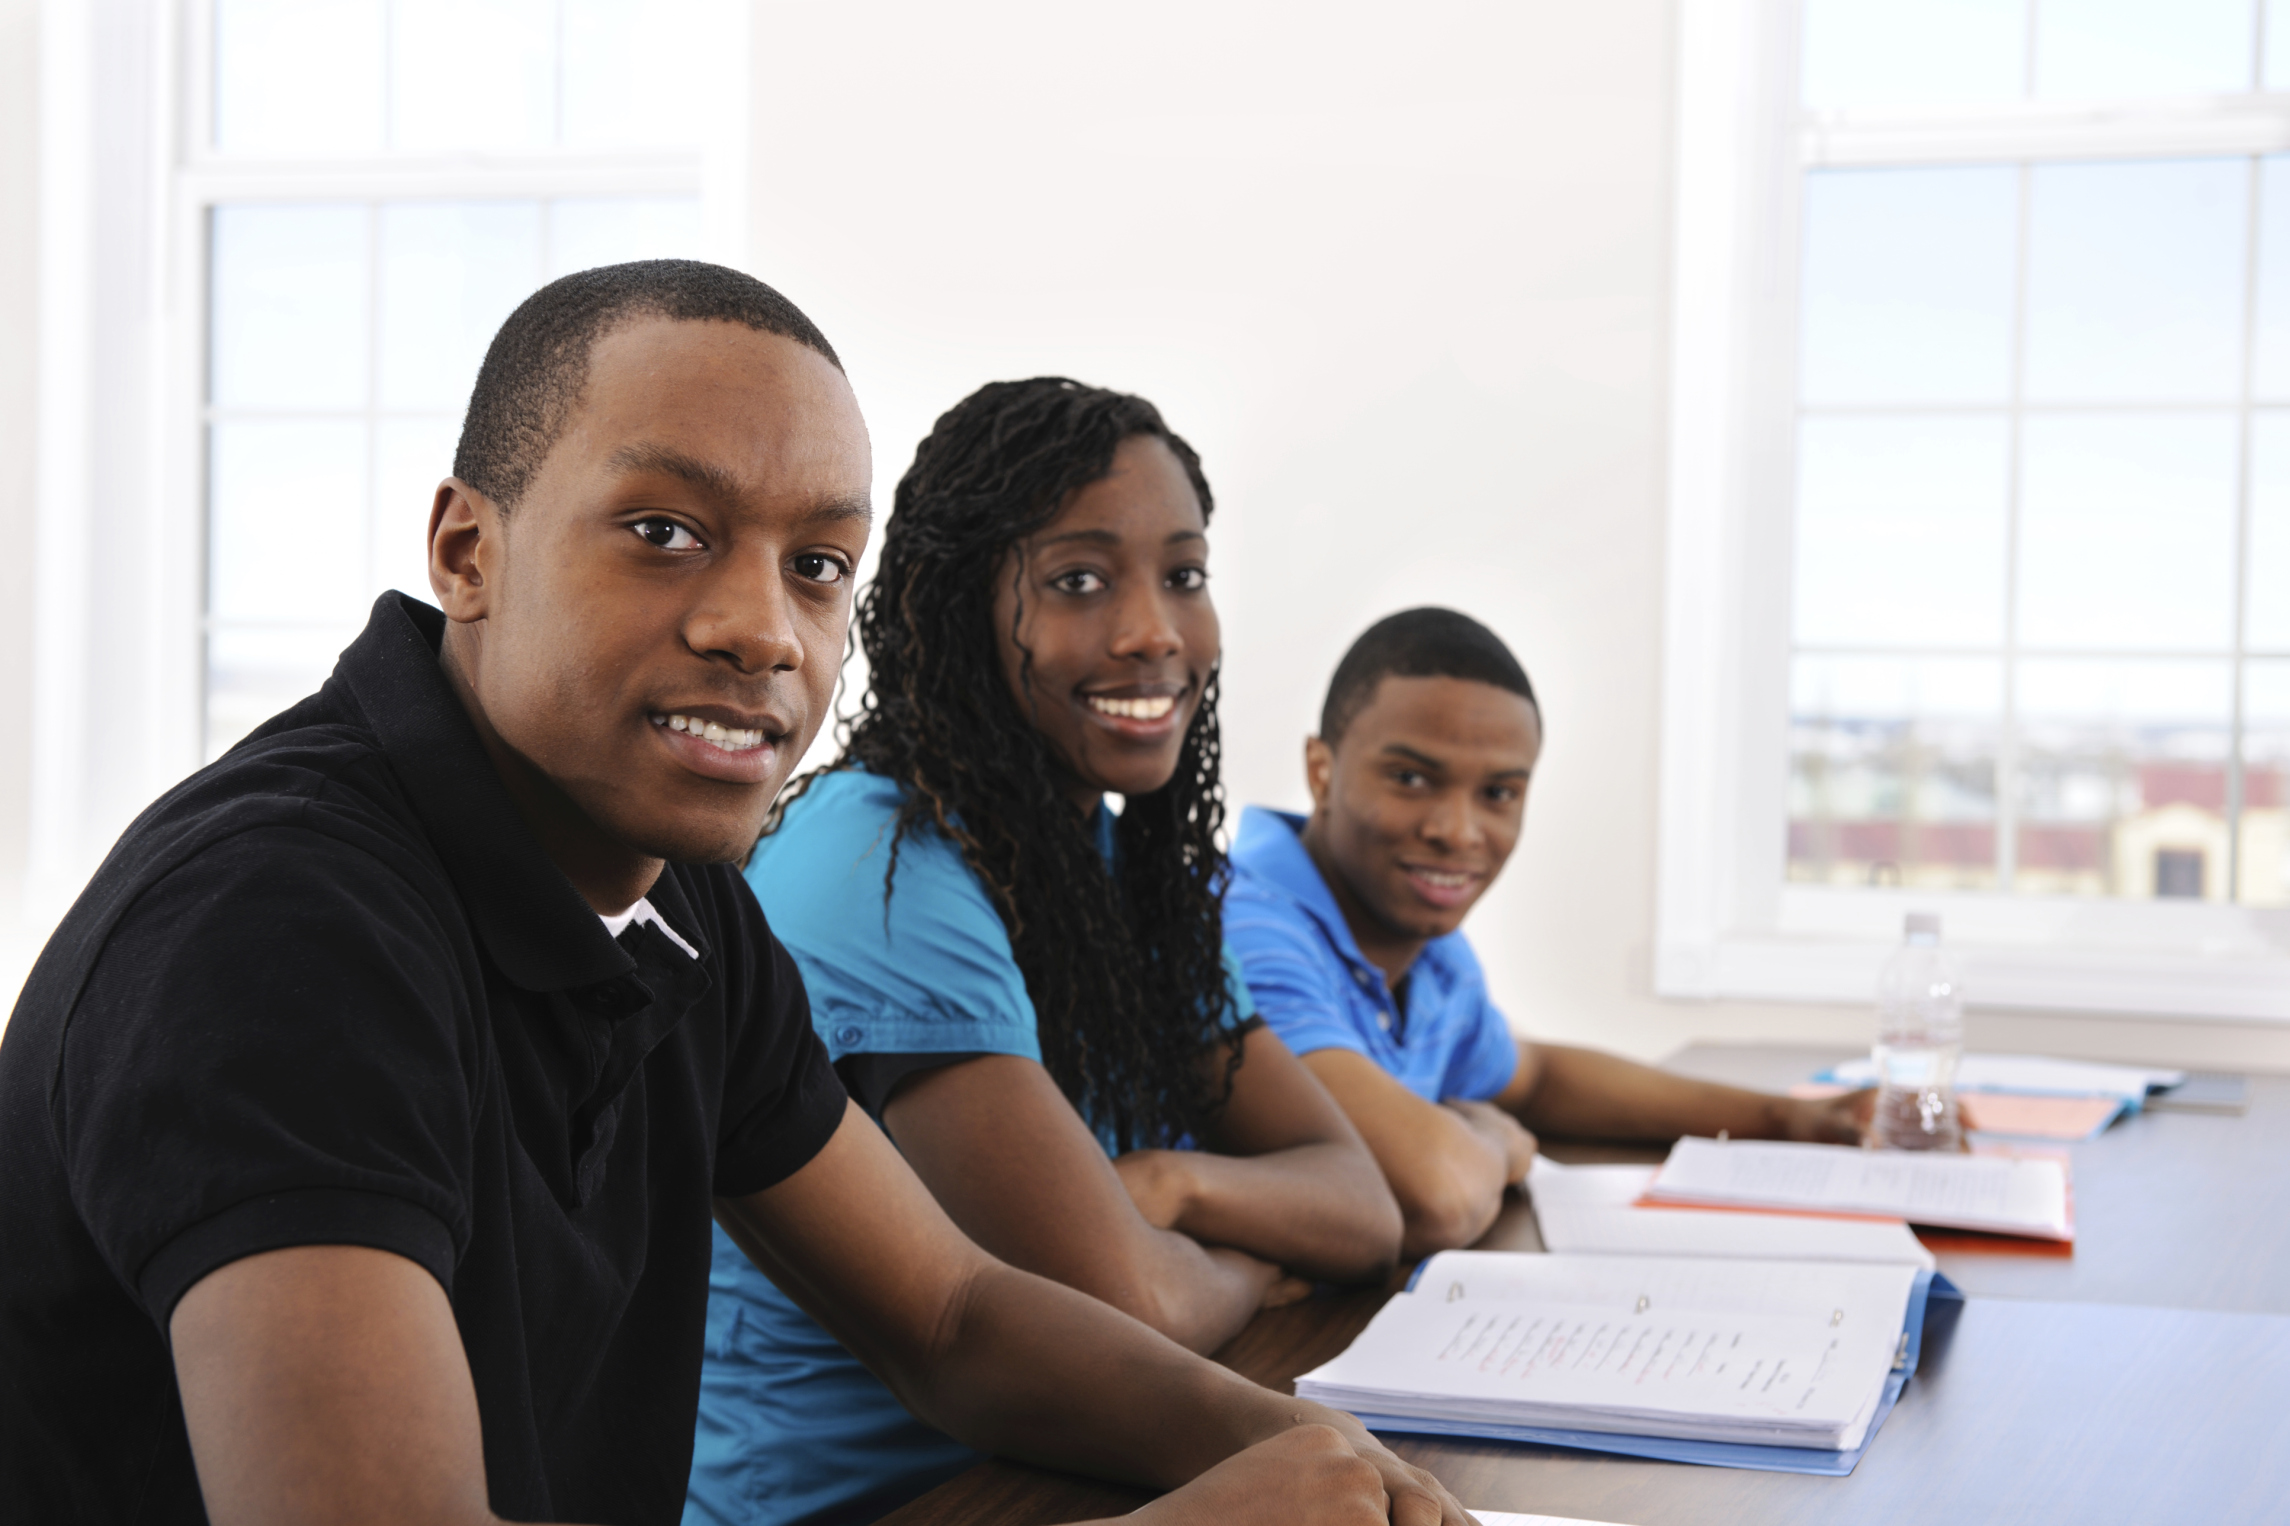 African American university students in a classroom.